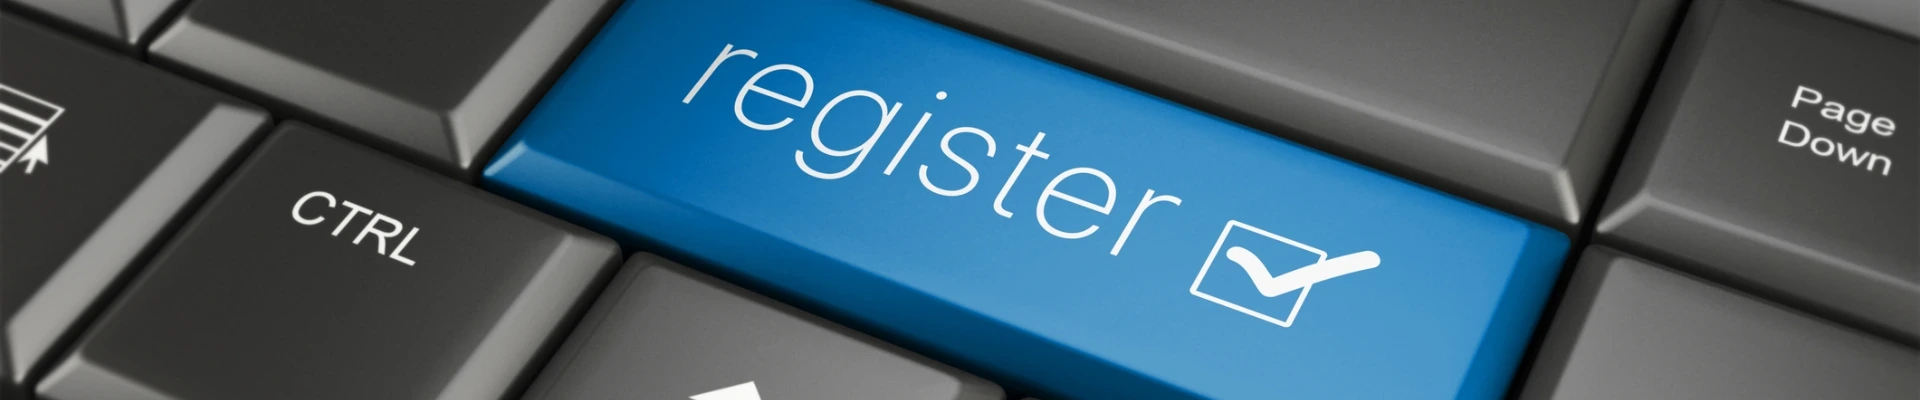 Information on Mandatory Registration with the Hungarian Chamber of Commerce and Industry (HCCI)